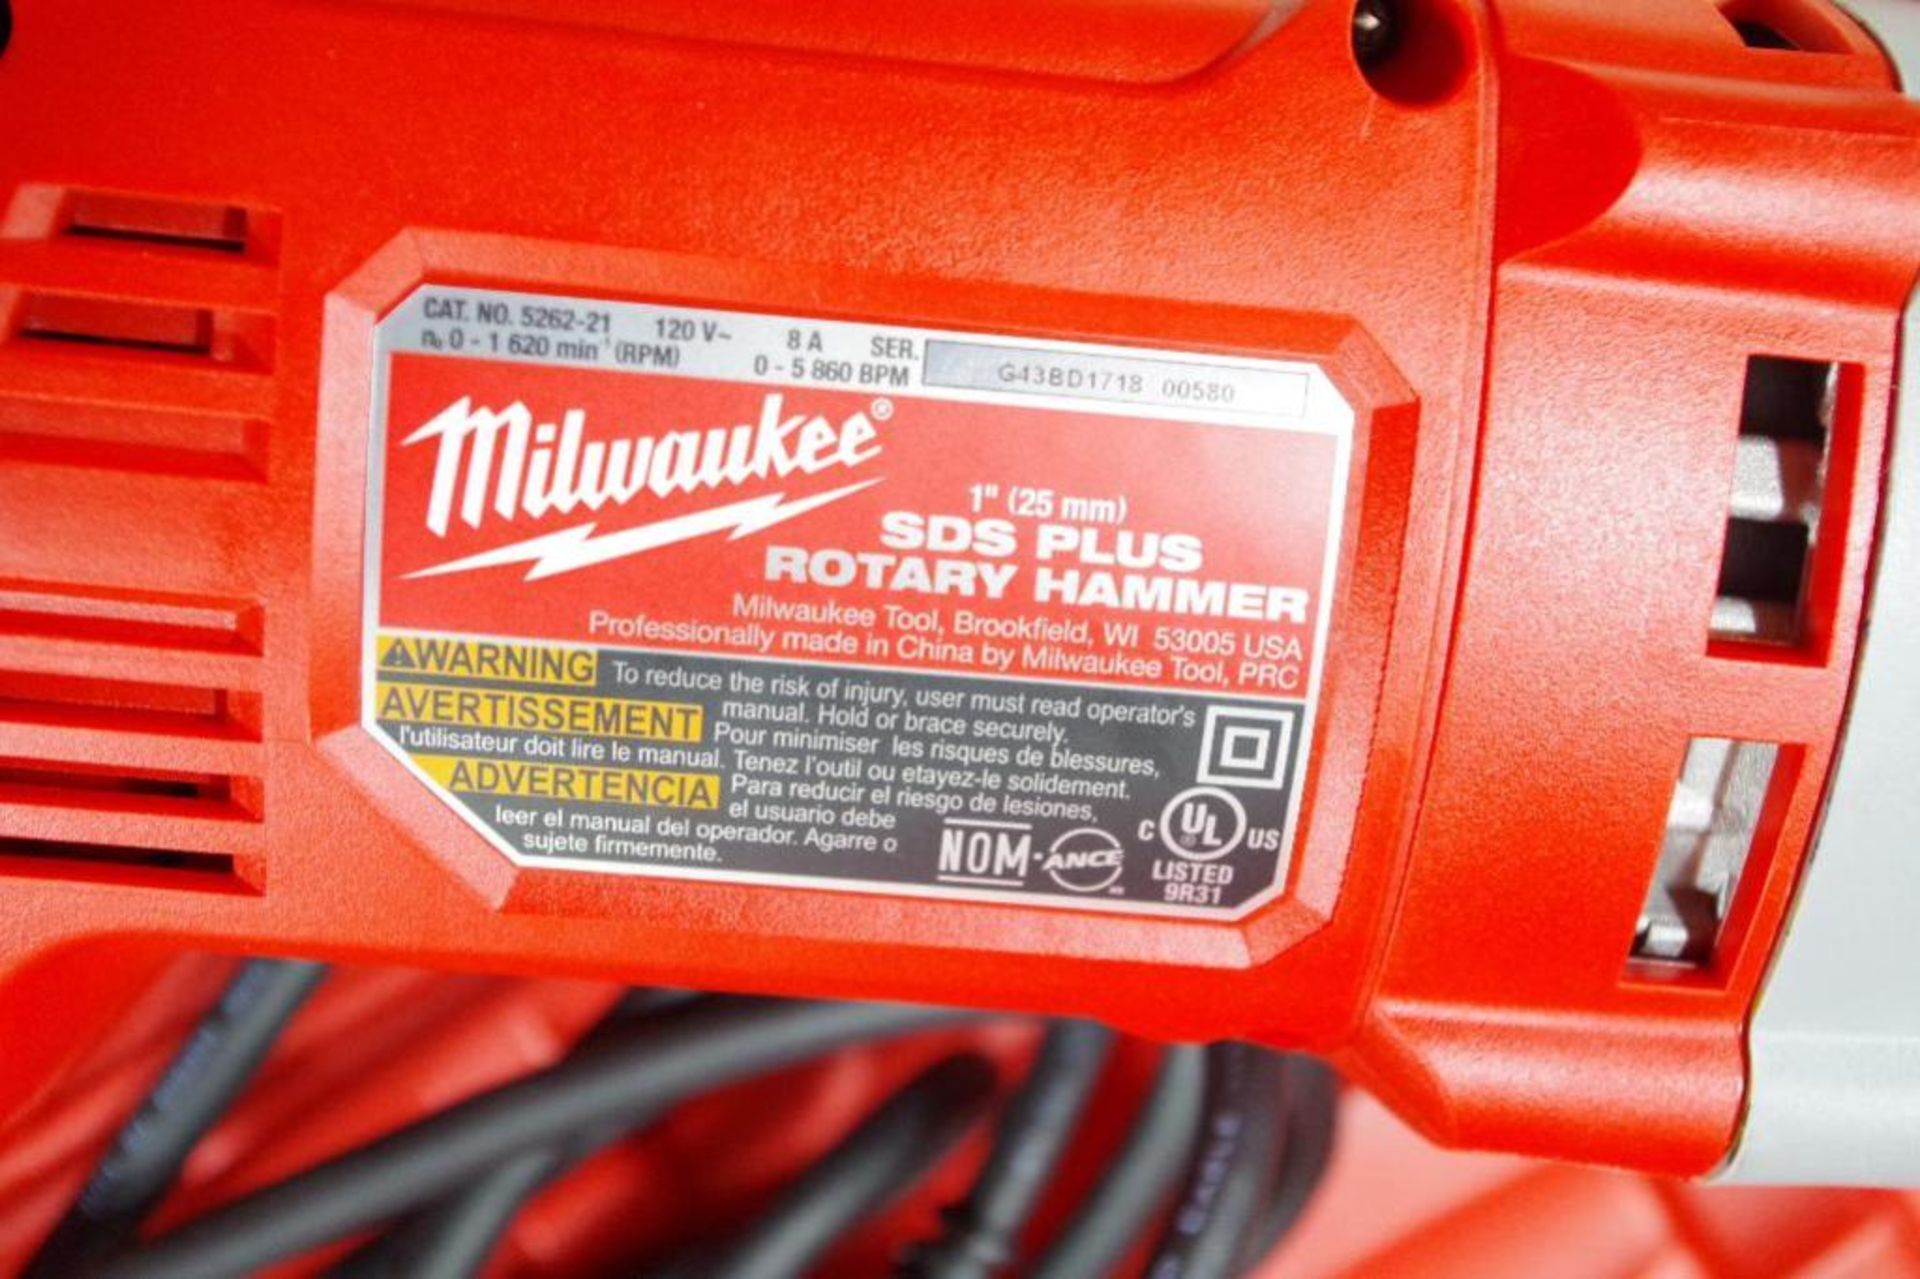 MILWAUKEE 1" SDS Plus Rotary Hammer M/N 5262-21 w/ Tool Grip & Case - Image 2 of 4